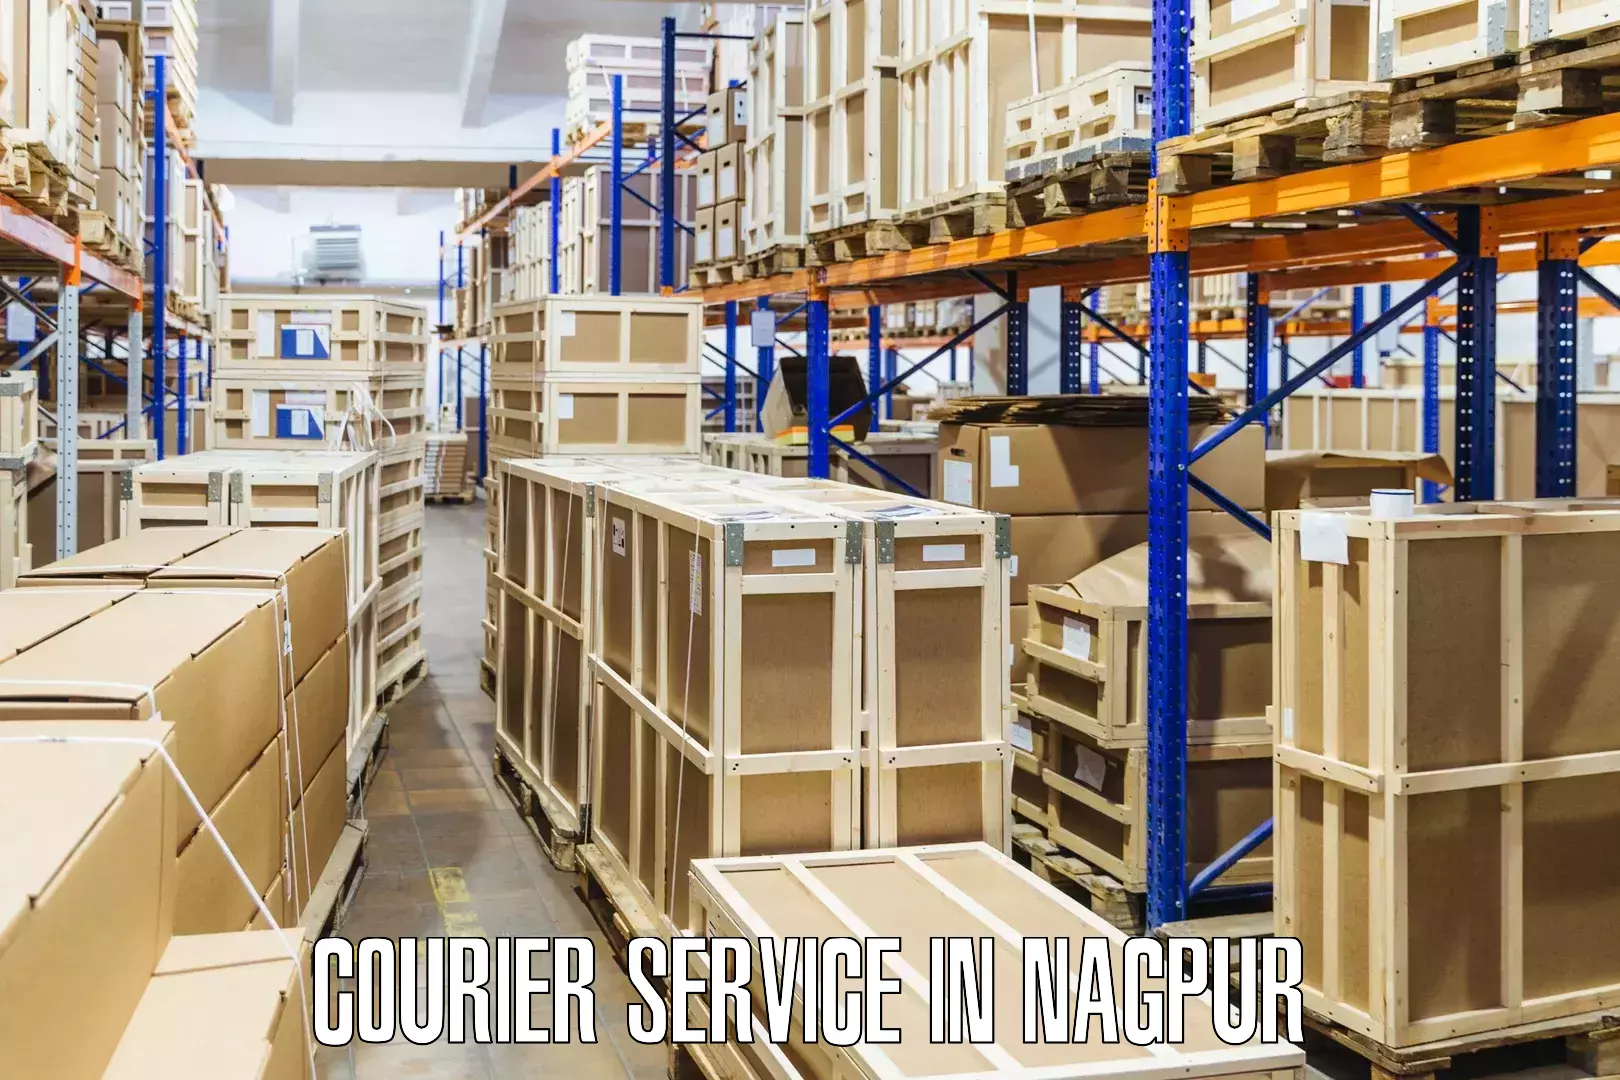 Streamlined delivery processes in Nagpur